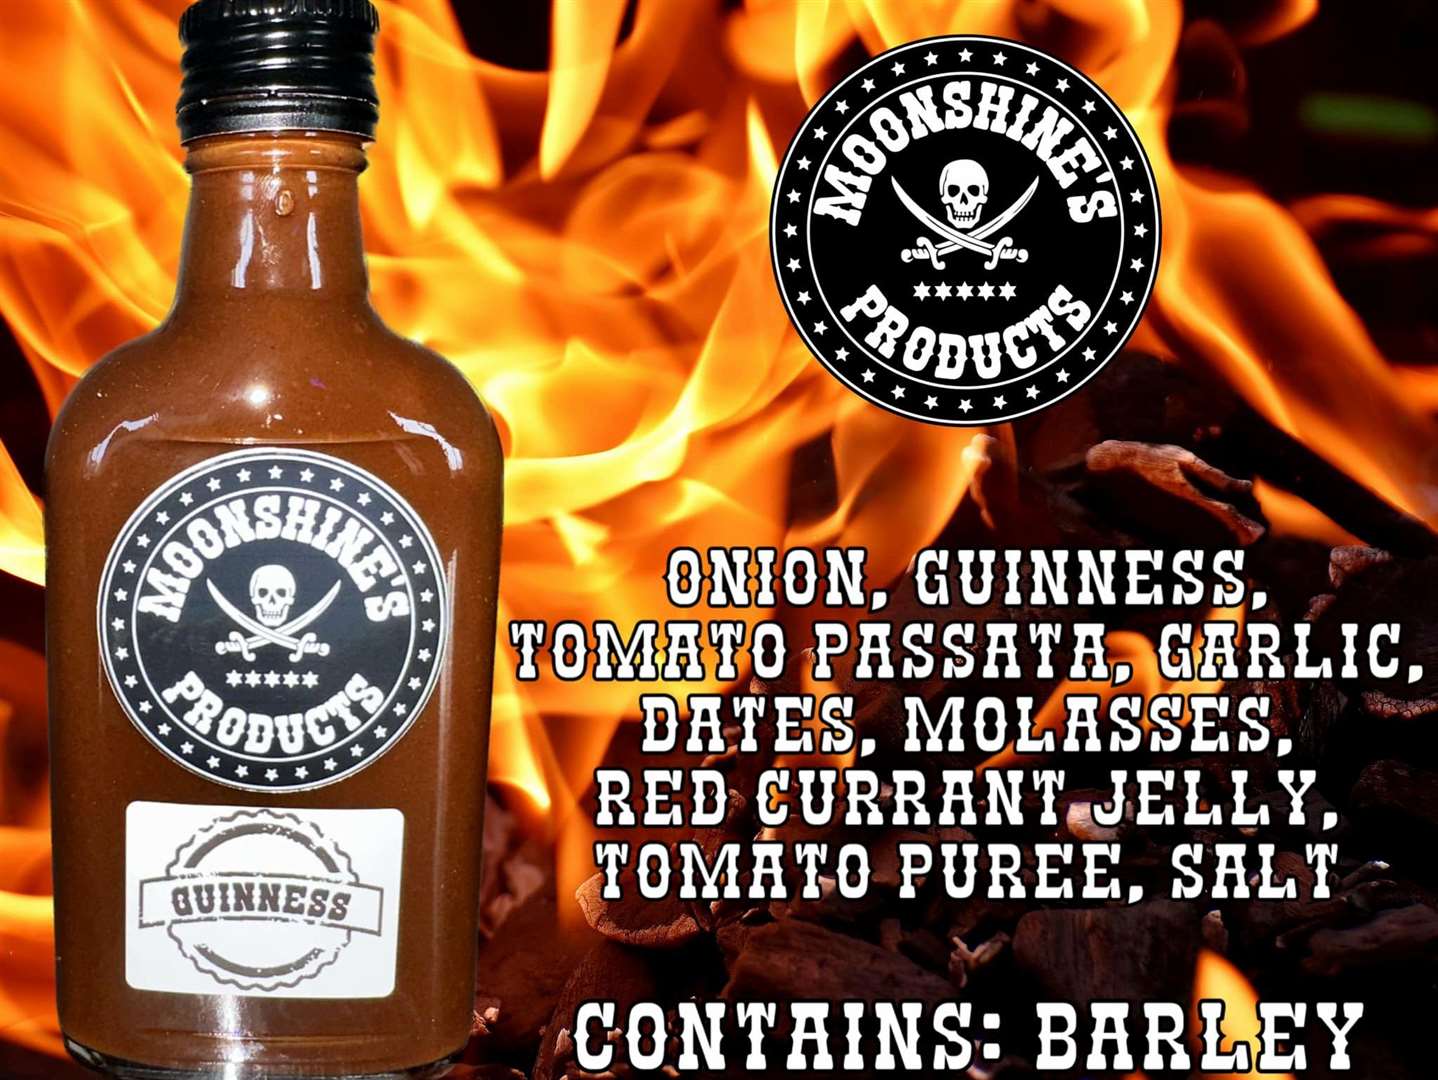 Items included the company’s Guinness sauce. Picture: Moonshine's Products/Facebook